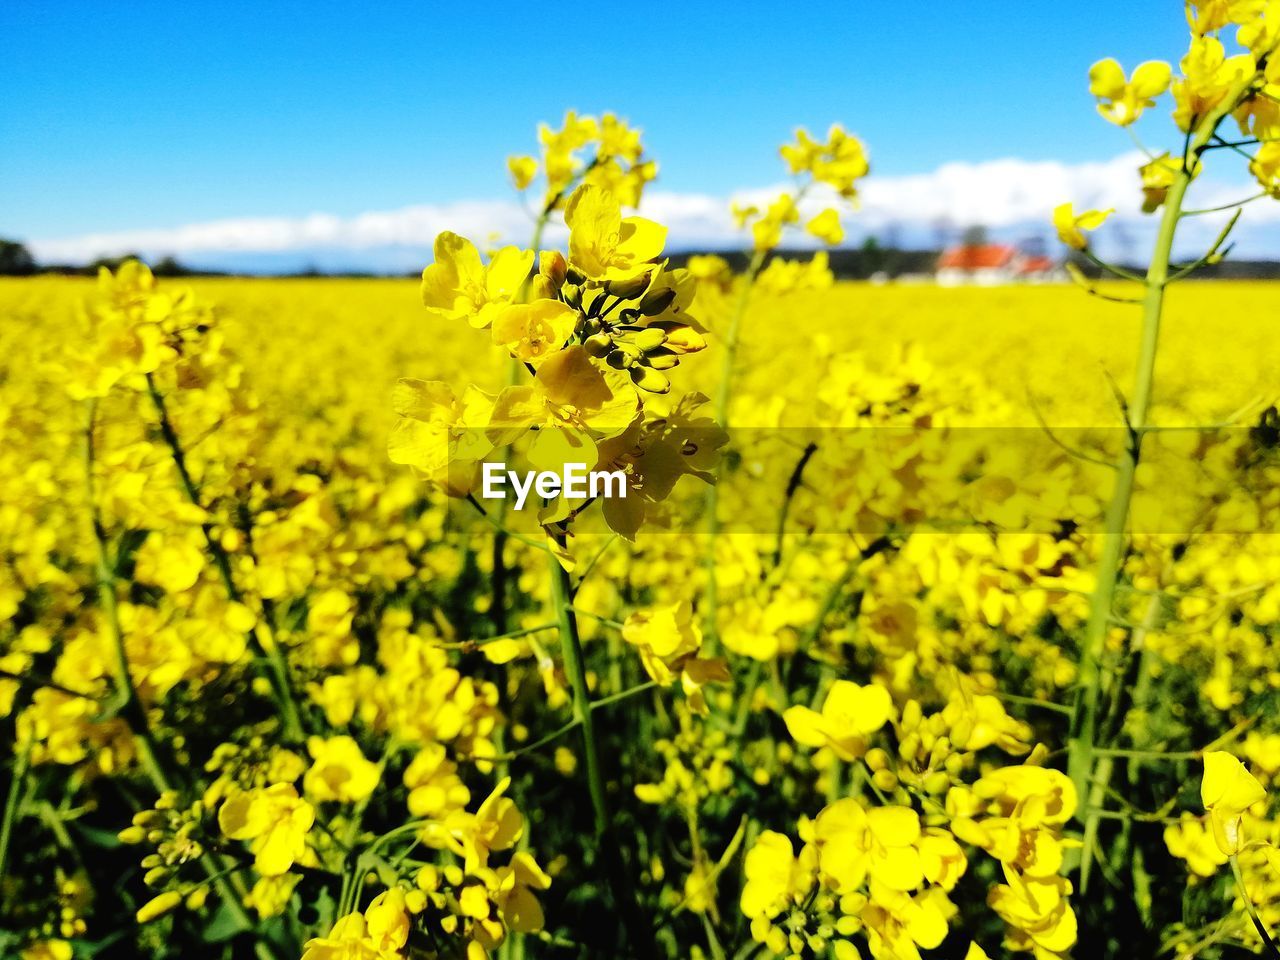 Close-up of yellow flowers on field against sky